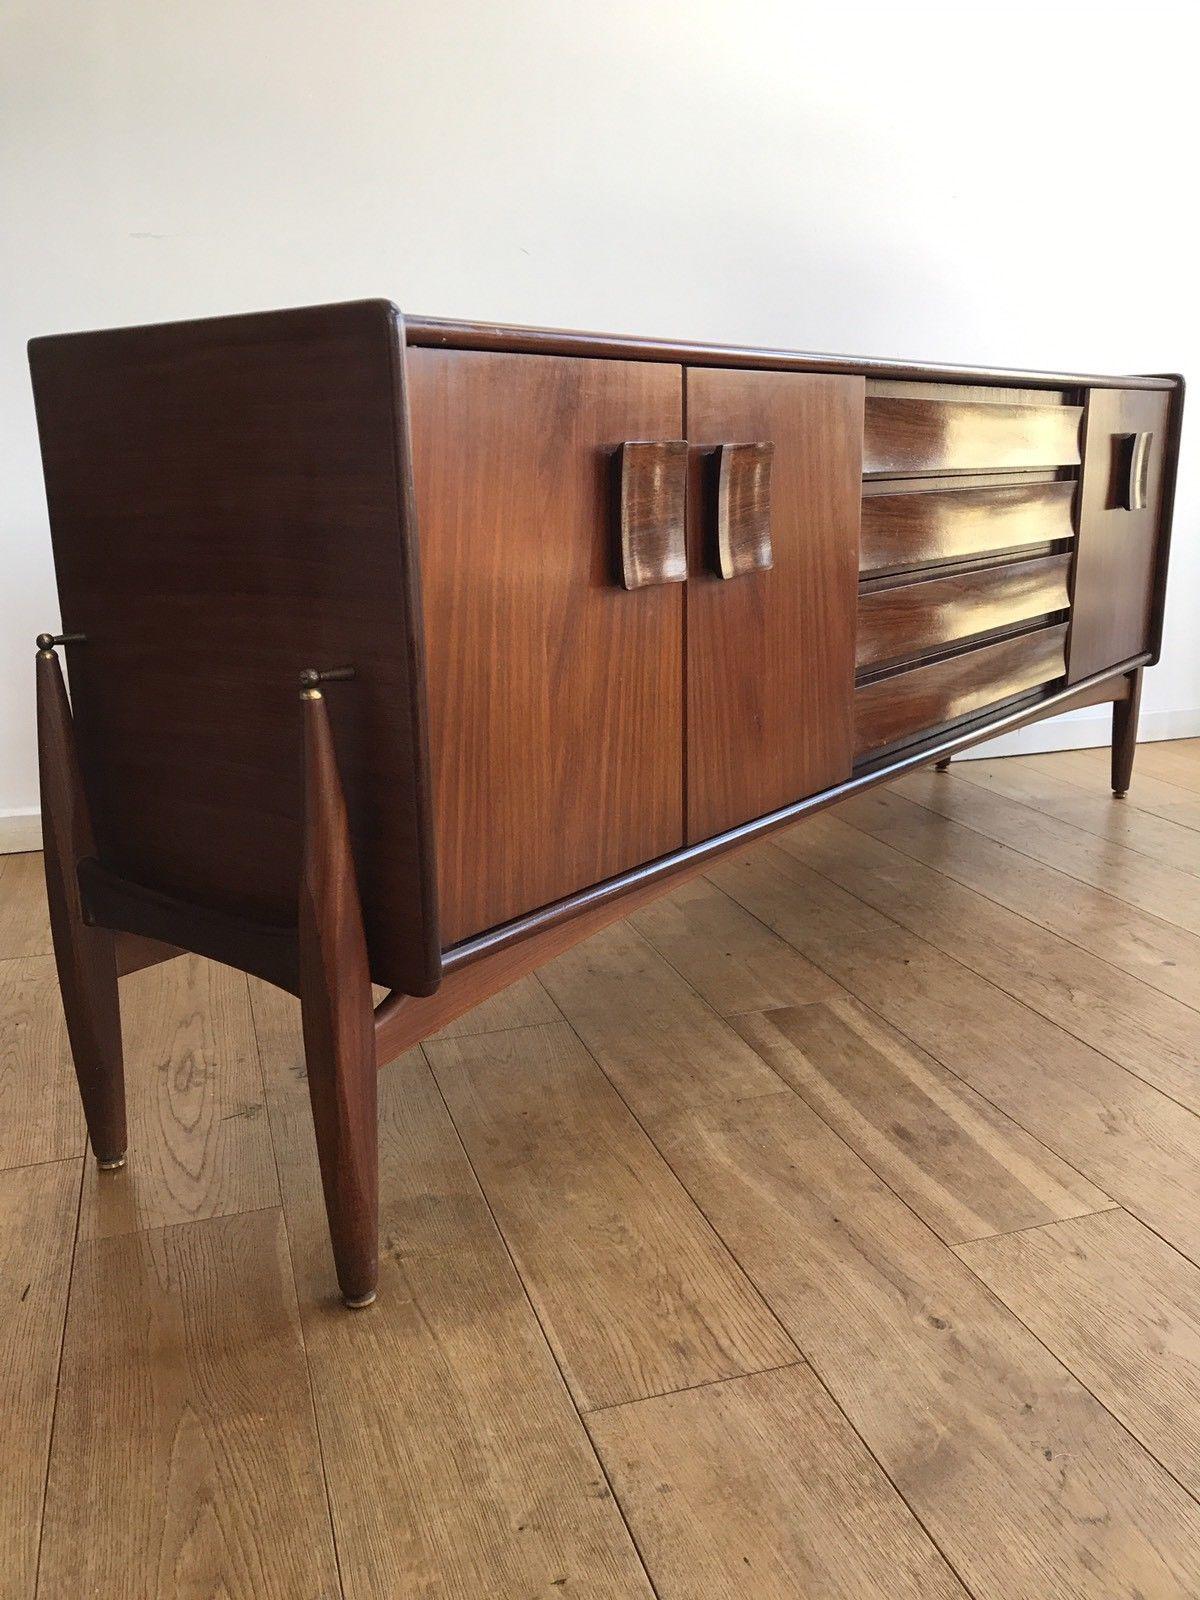 Vintage Elliot's Of Newbury midcentury teak retro sideboard
A fabulous, rare sideboard made by Elliot's Of Newbury.

Elliot's of Newbury have a fascinating history, formerly producing aeroplanes and making parts for Spitfires during WWII!

This